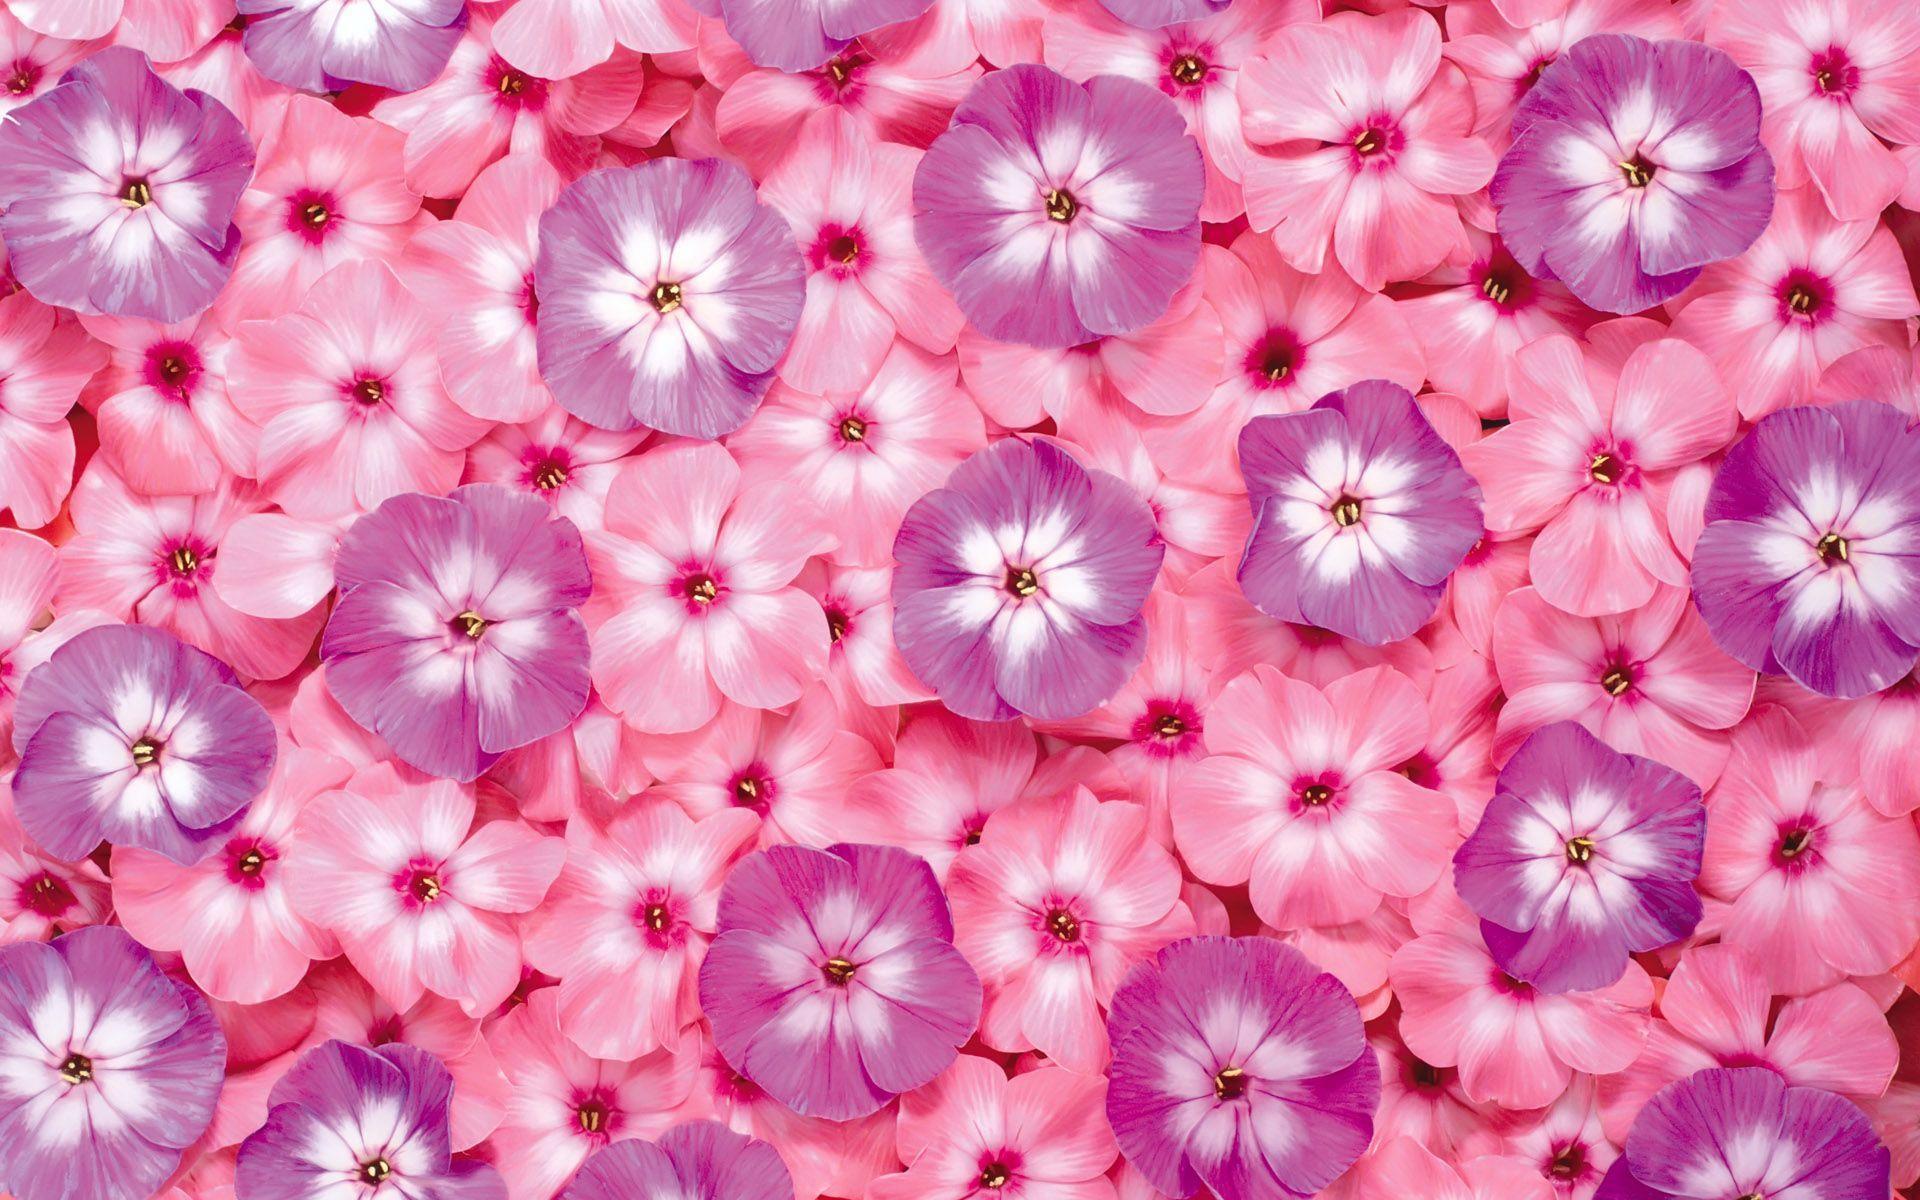 The first series of flowers background 13647